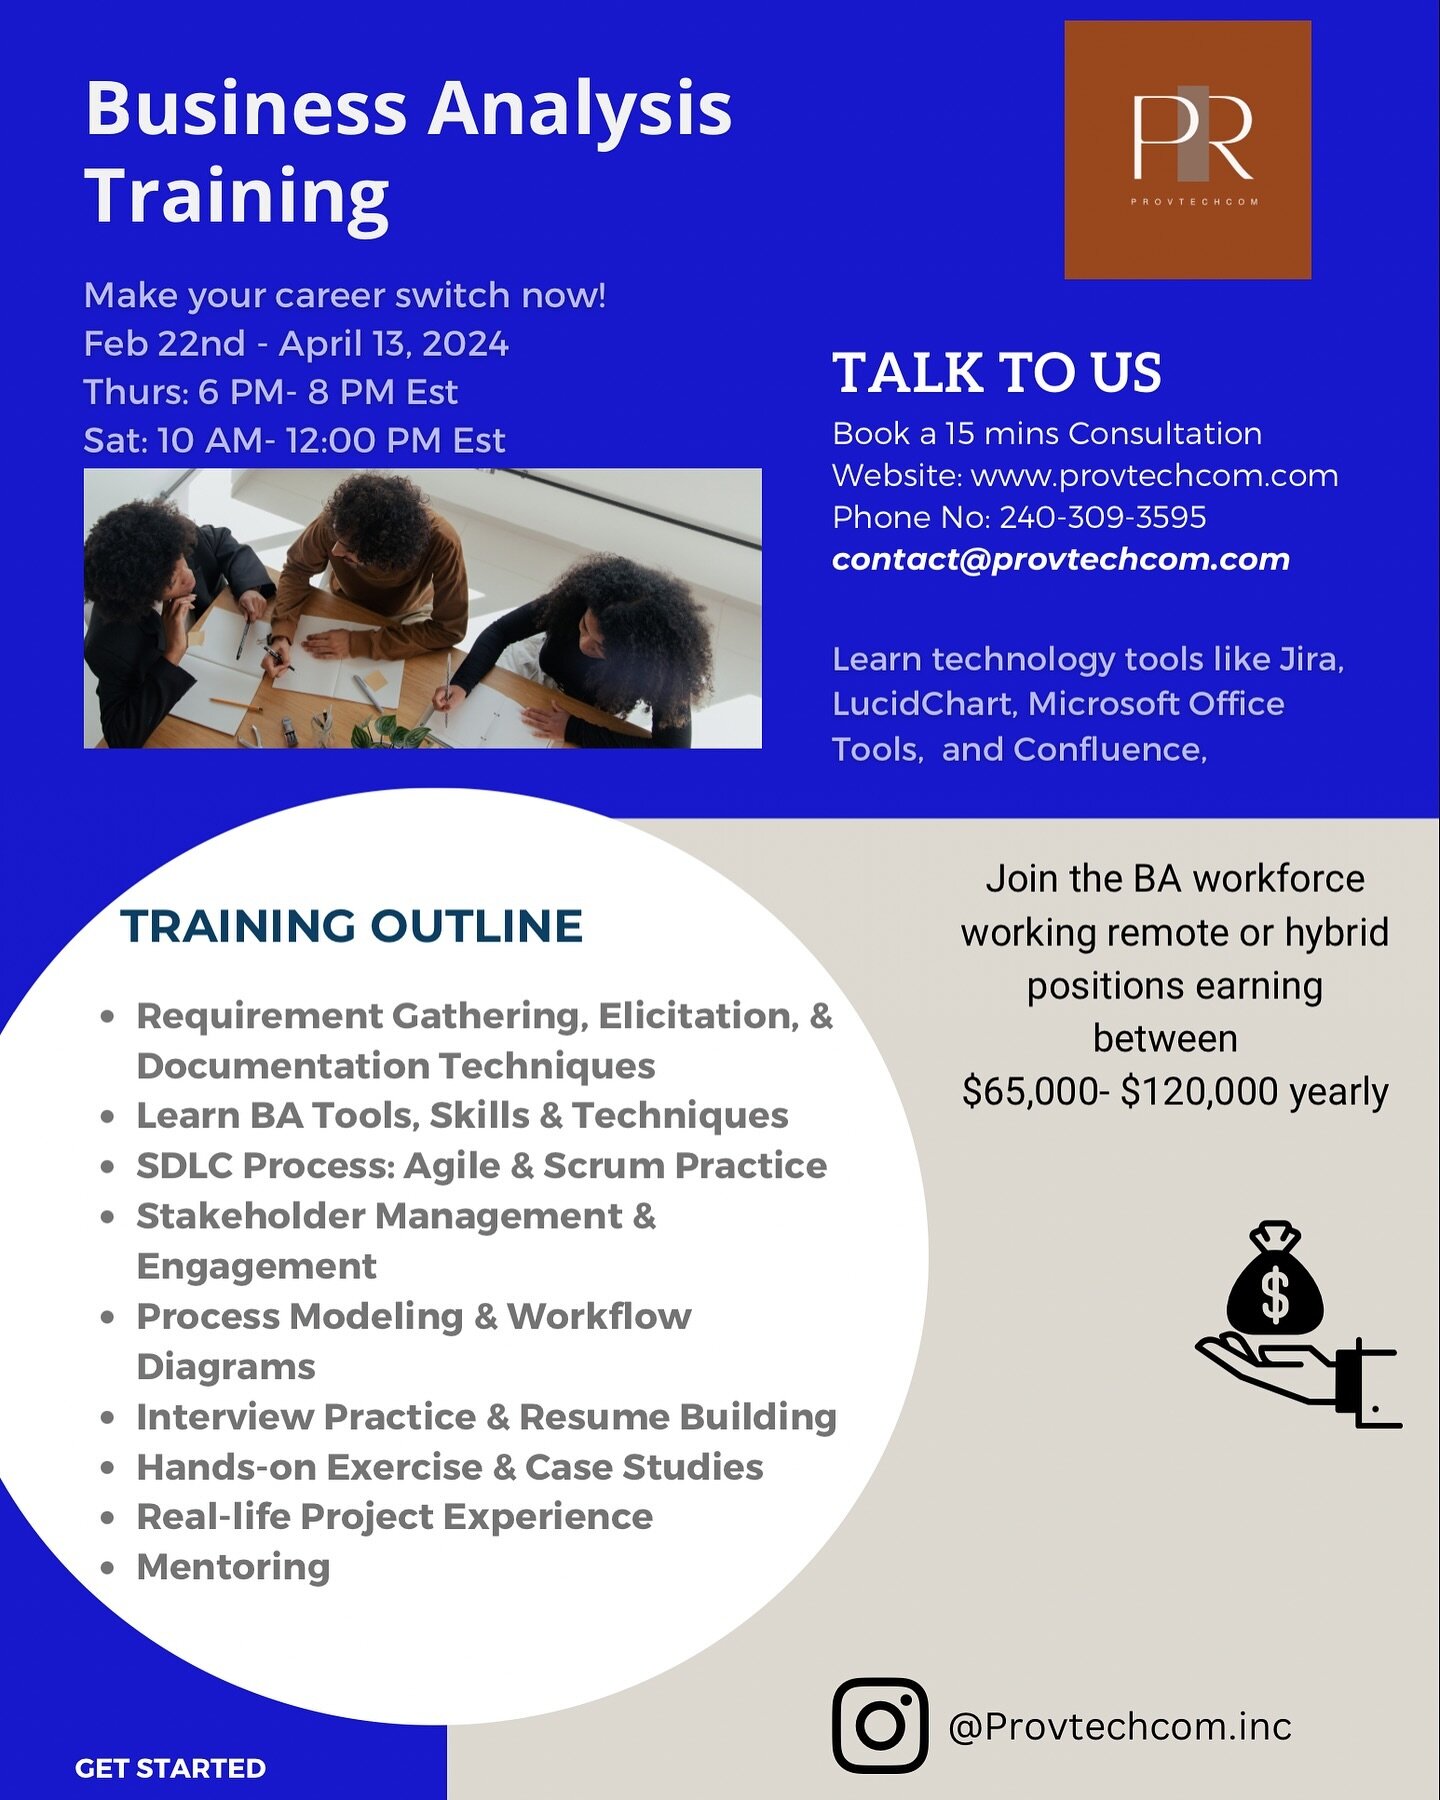 BA Class starts February 22nd 2024! Registration ends in February 21st. Sign up and take the next steps to making that career change!

#businessanalyst  #BAtraining  #businessanalysts #tech #techjobs #careerdevelopment #careerchange #techtraining #it